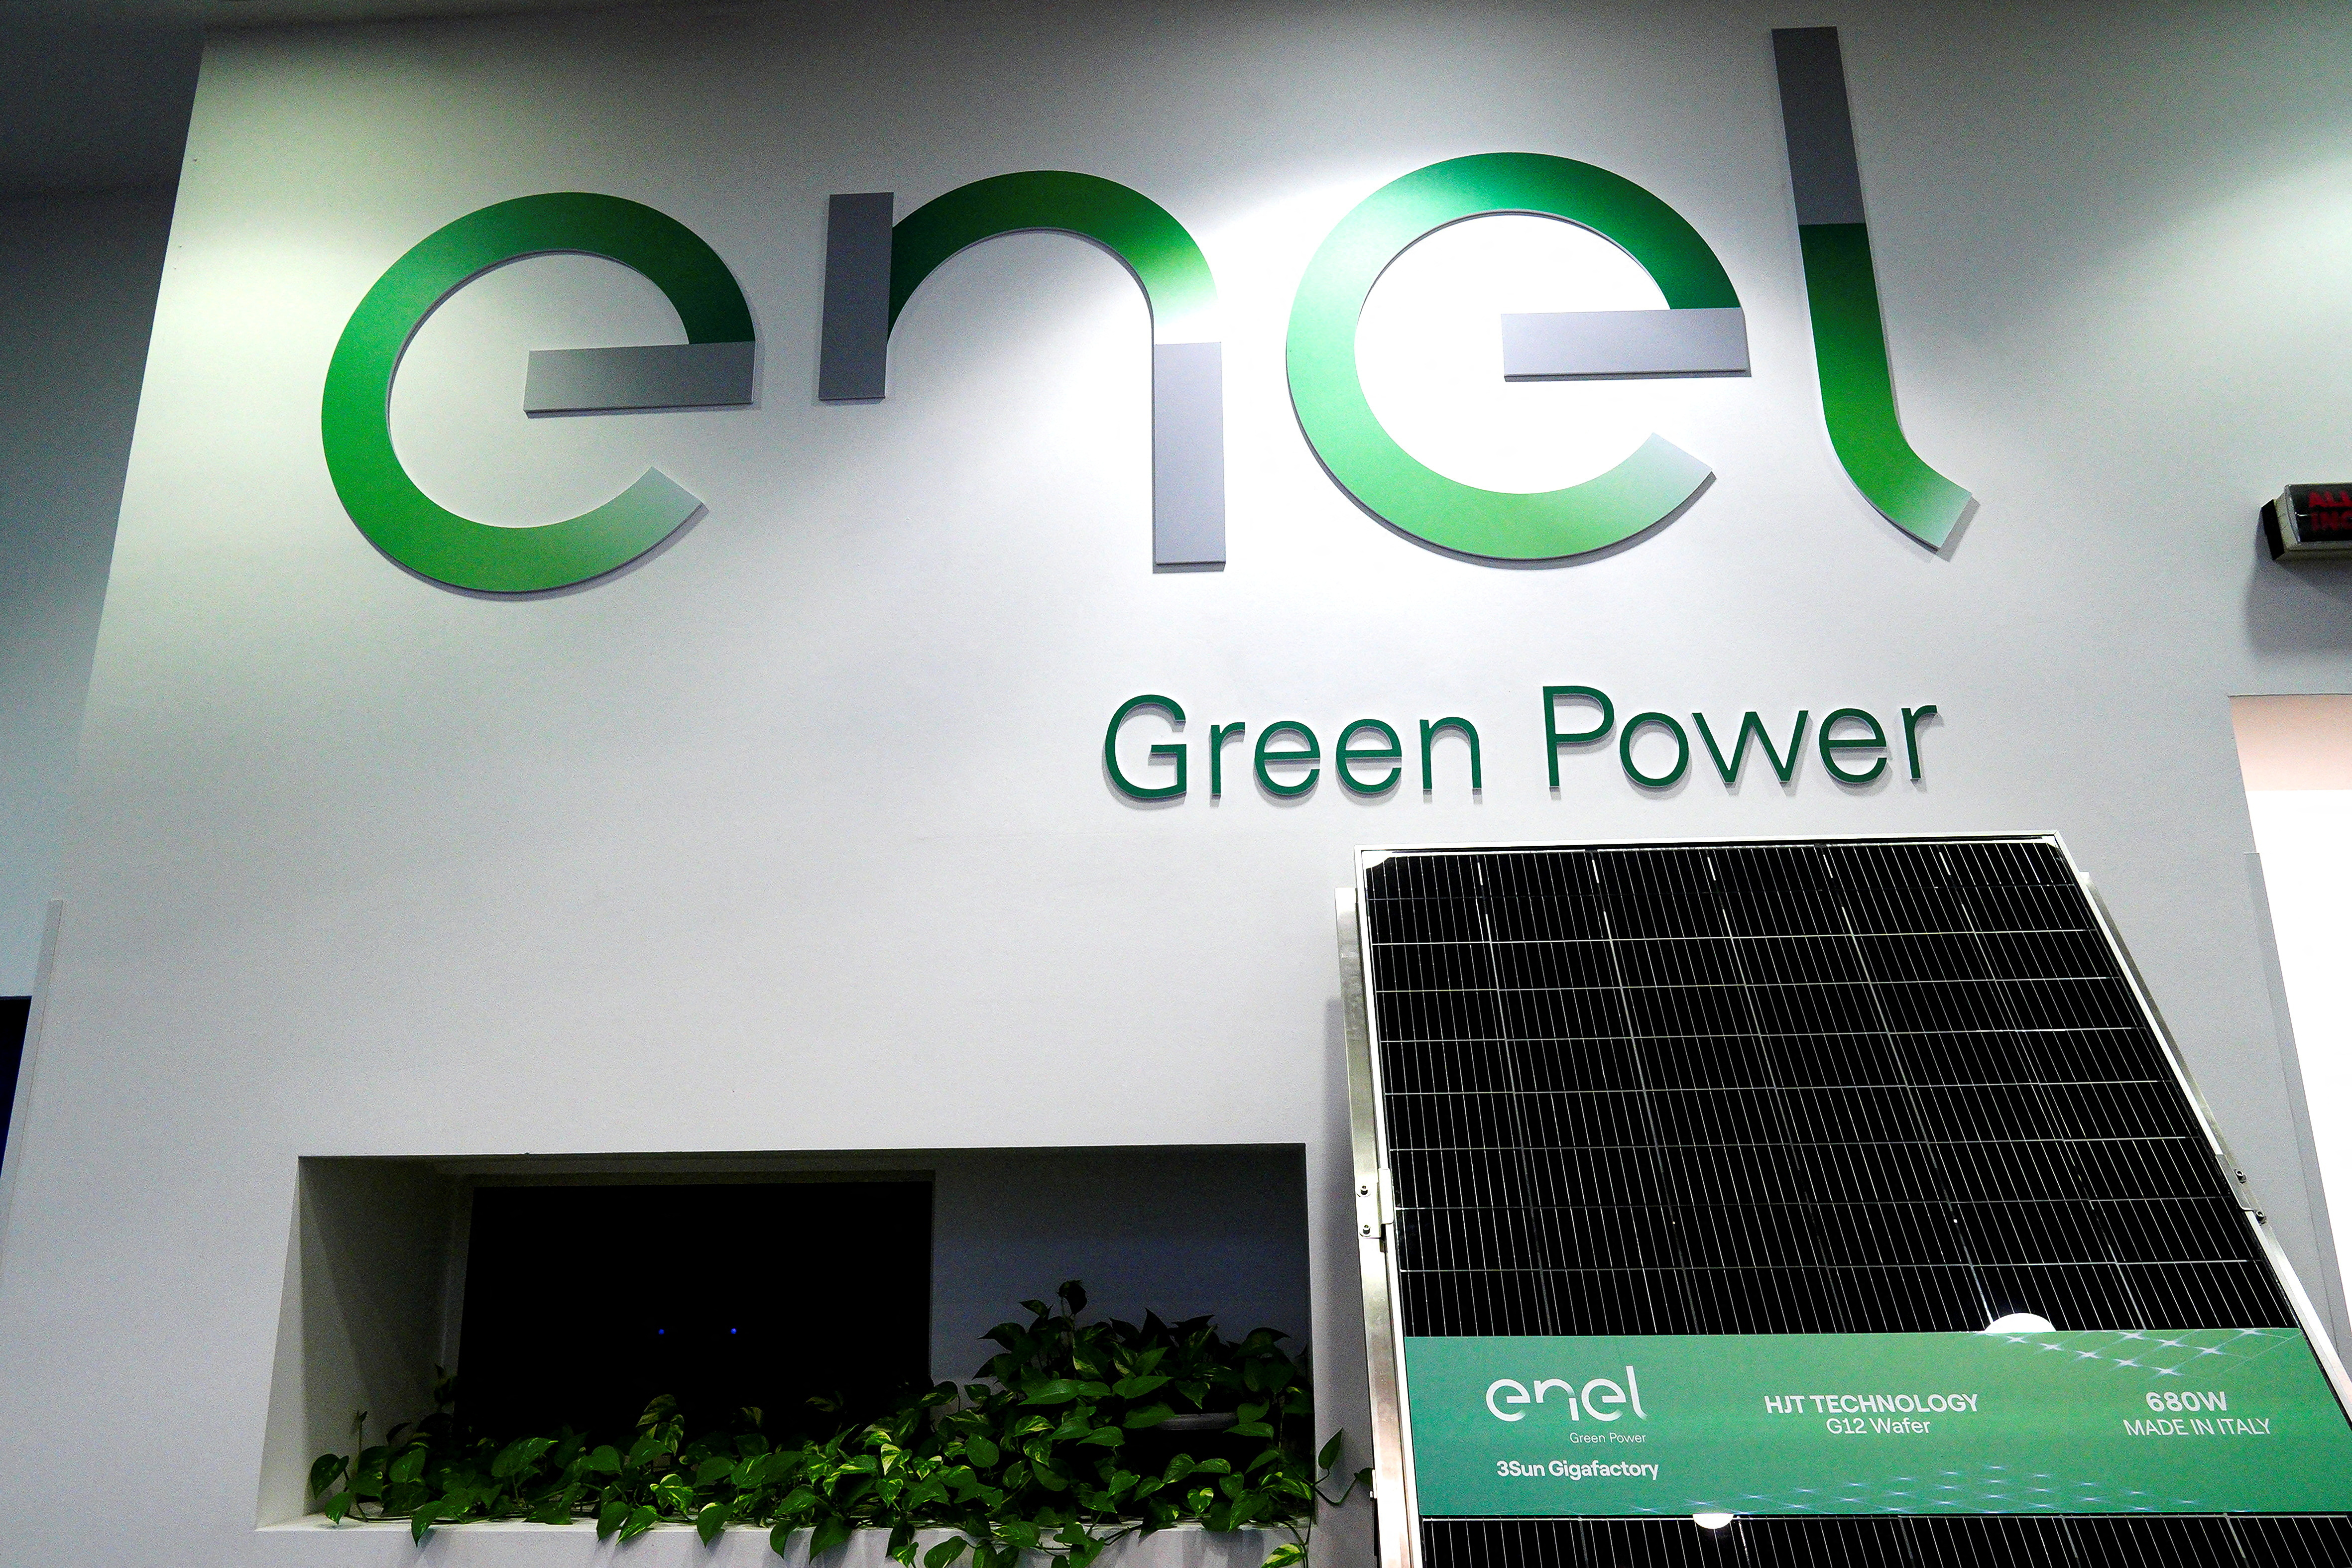 New Enel CEO turns more cautious on renewable projects